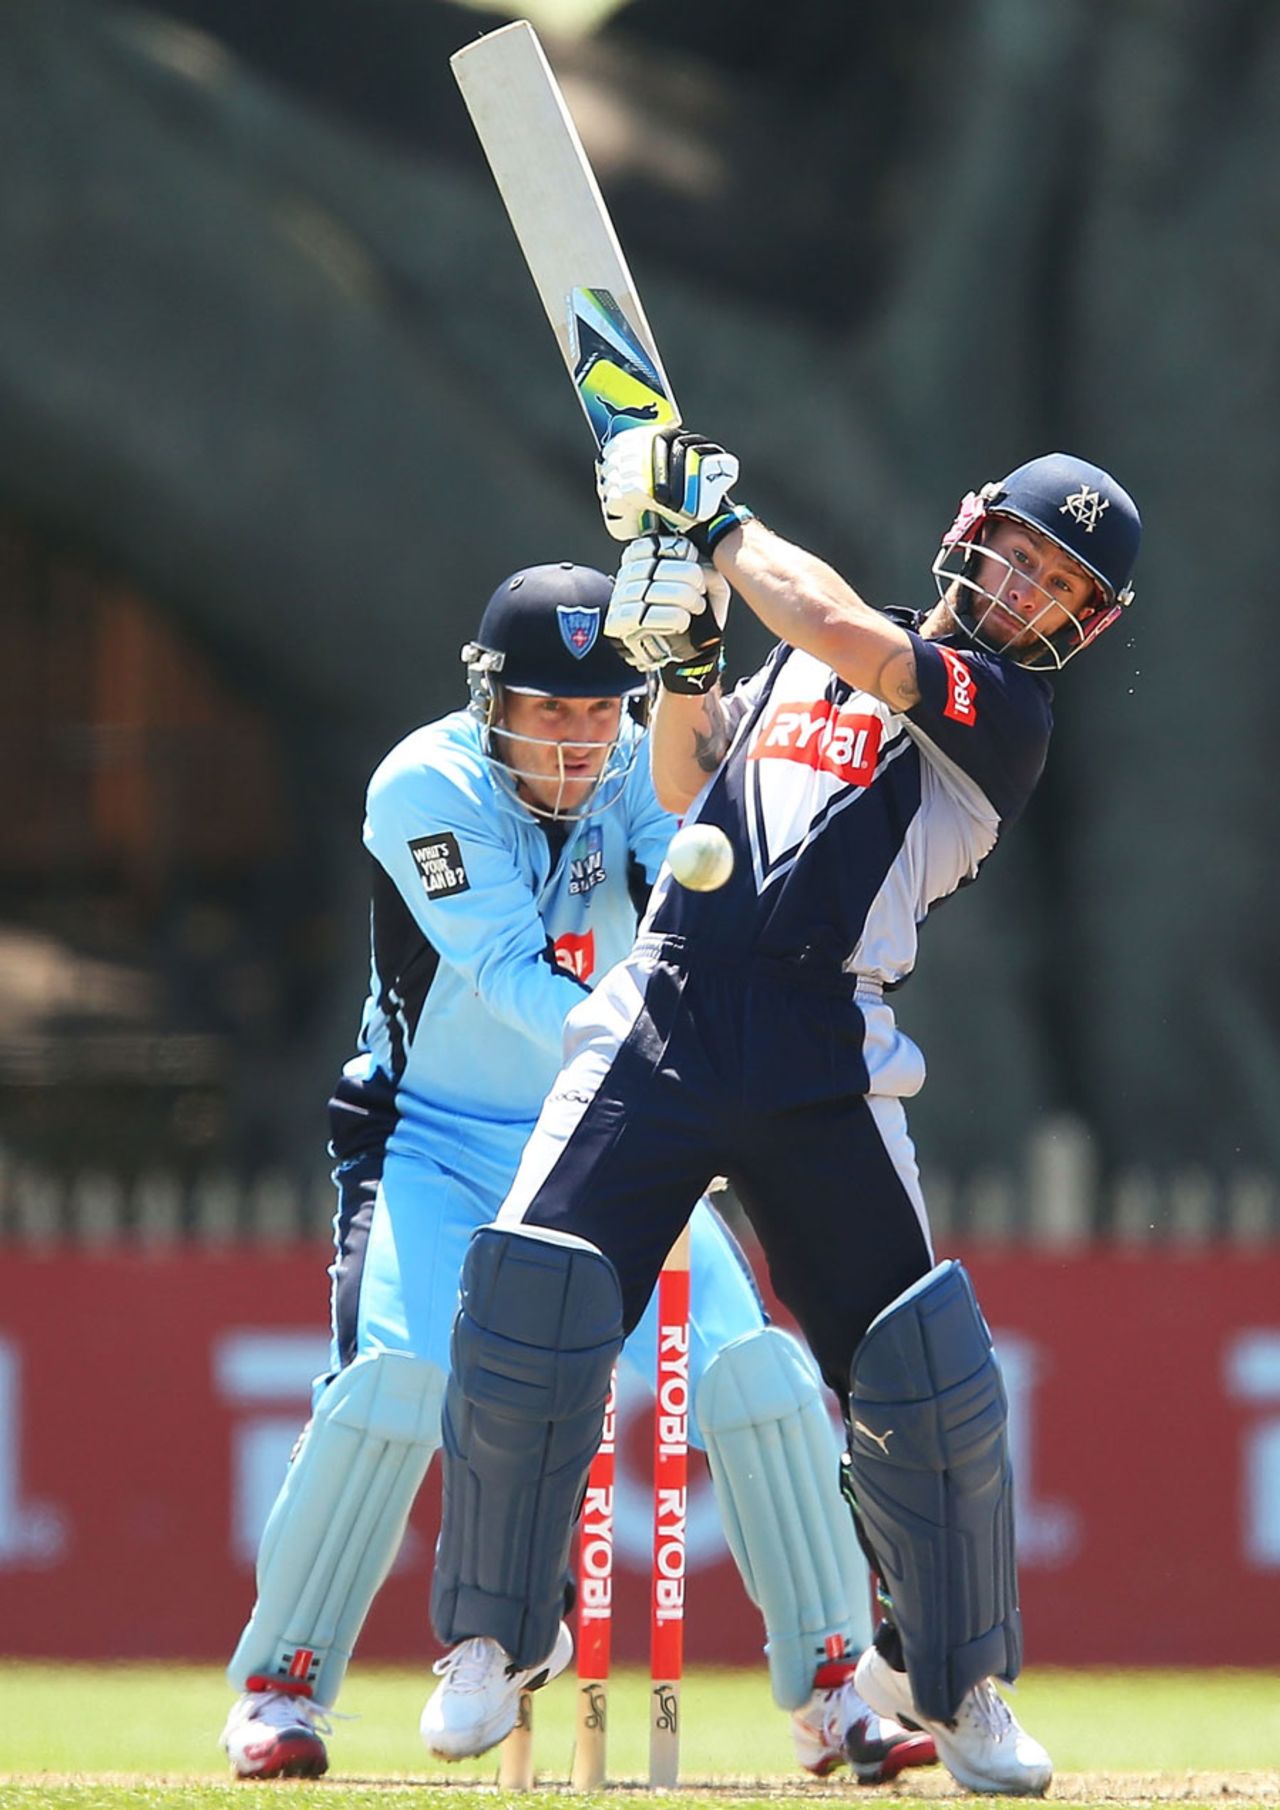 Matthew Wade struck an 81-ball 85 and top-scored for Victoria, New South Wales v Victoria, Ryobi One-Day Cup, Sydney, October 20, 2013